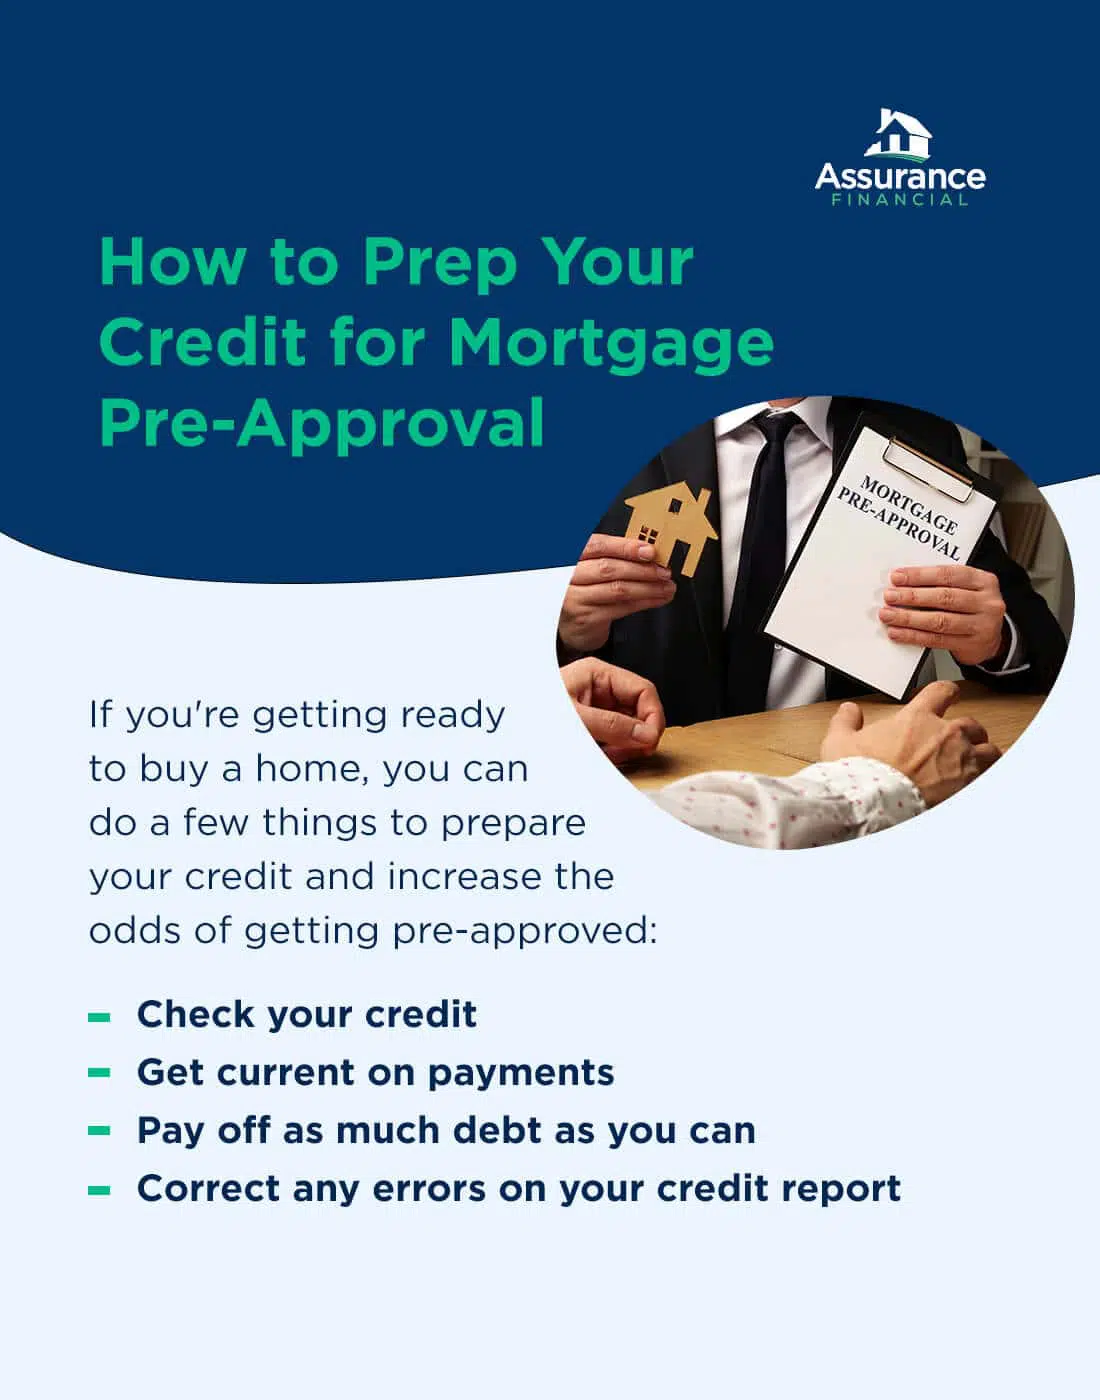 How to Prep Your Credit for Mortgage Pre-Approval